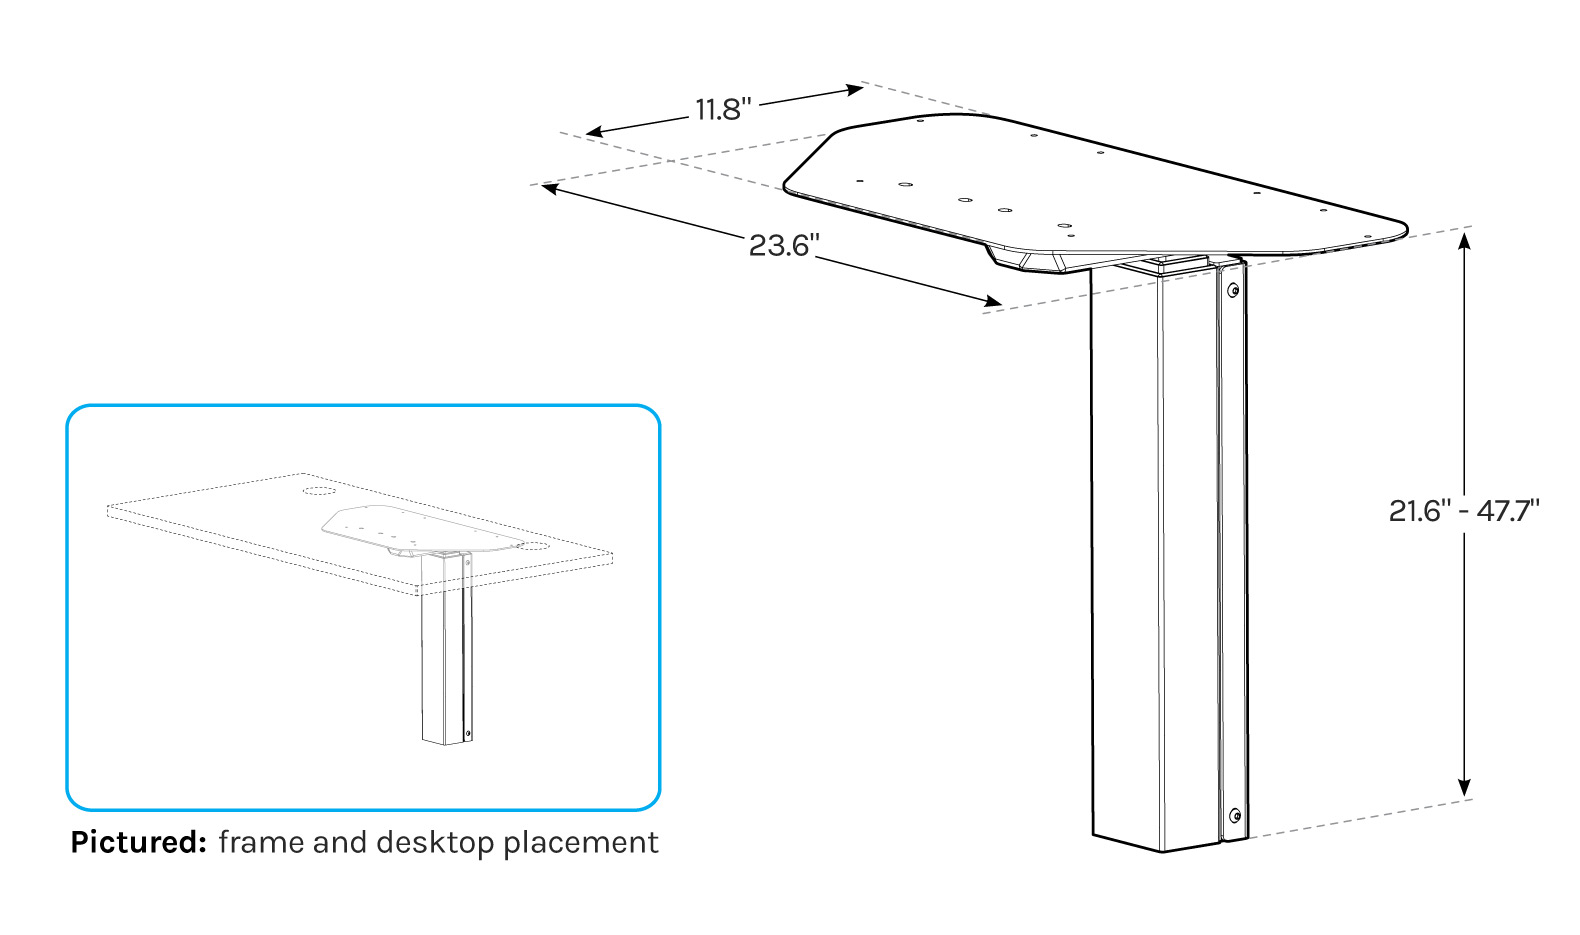 The benefits of an UPLIFT Desk workspace